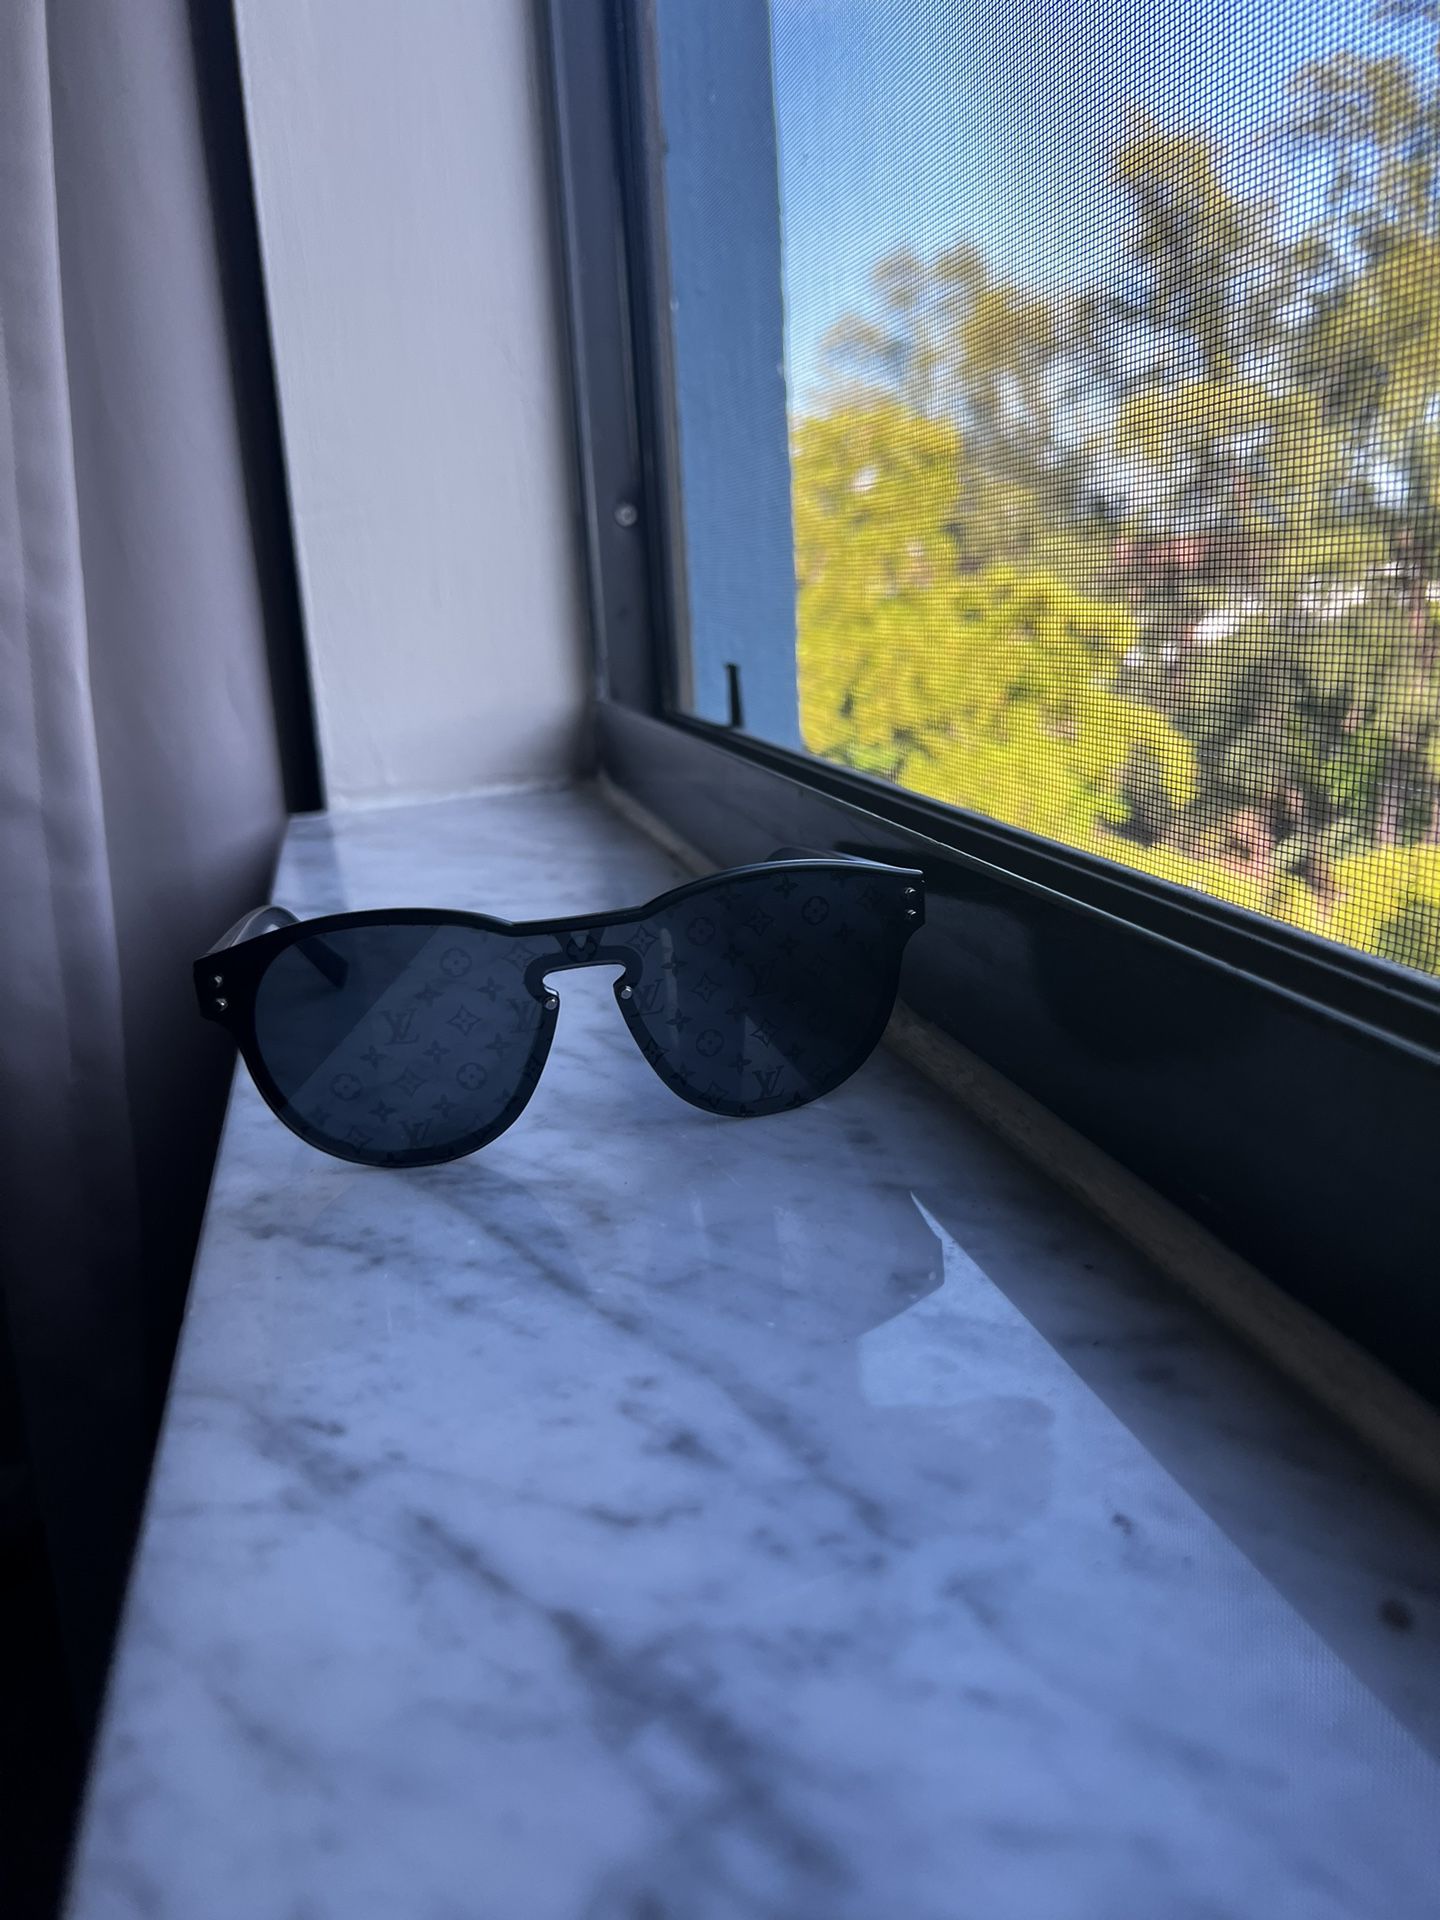 Louis Vuitton Sunglasses LV Waimea Round for Sale in Biscayne